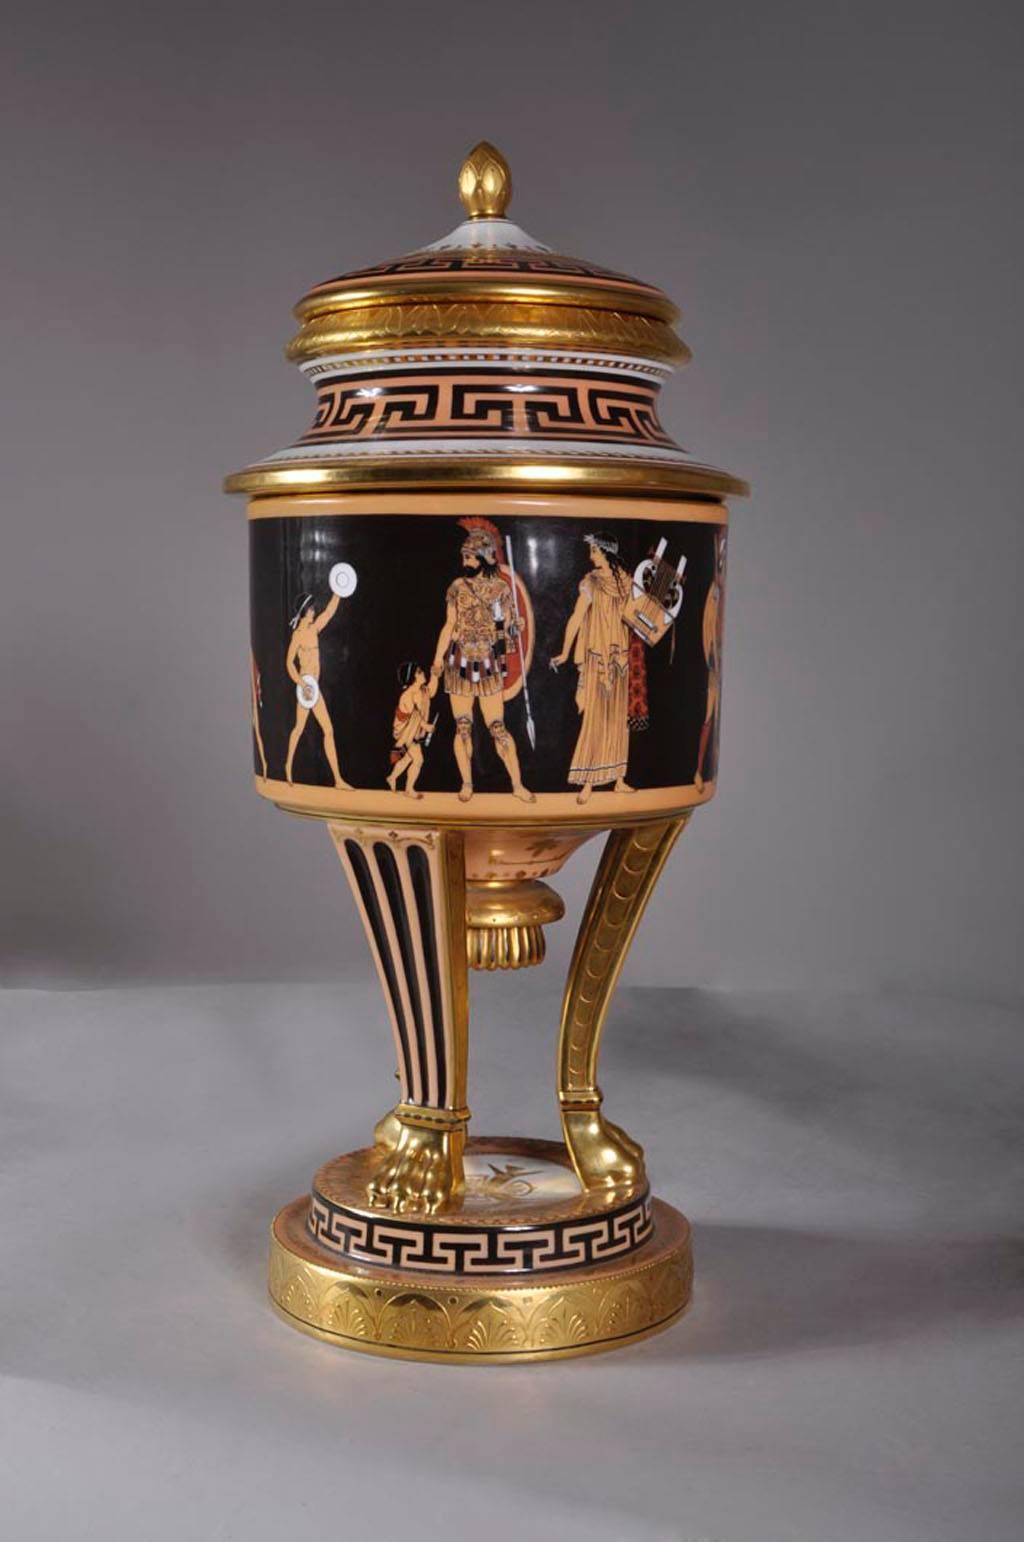 Greek Revival taste typical of the 19th century. There were manufactured by the Dresden Porcelain. The cassolette are decorated of neo-Greek scene with different characters such as a vestal, soldier, lutte player.